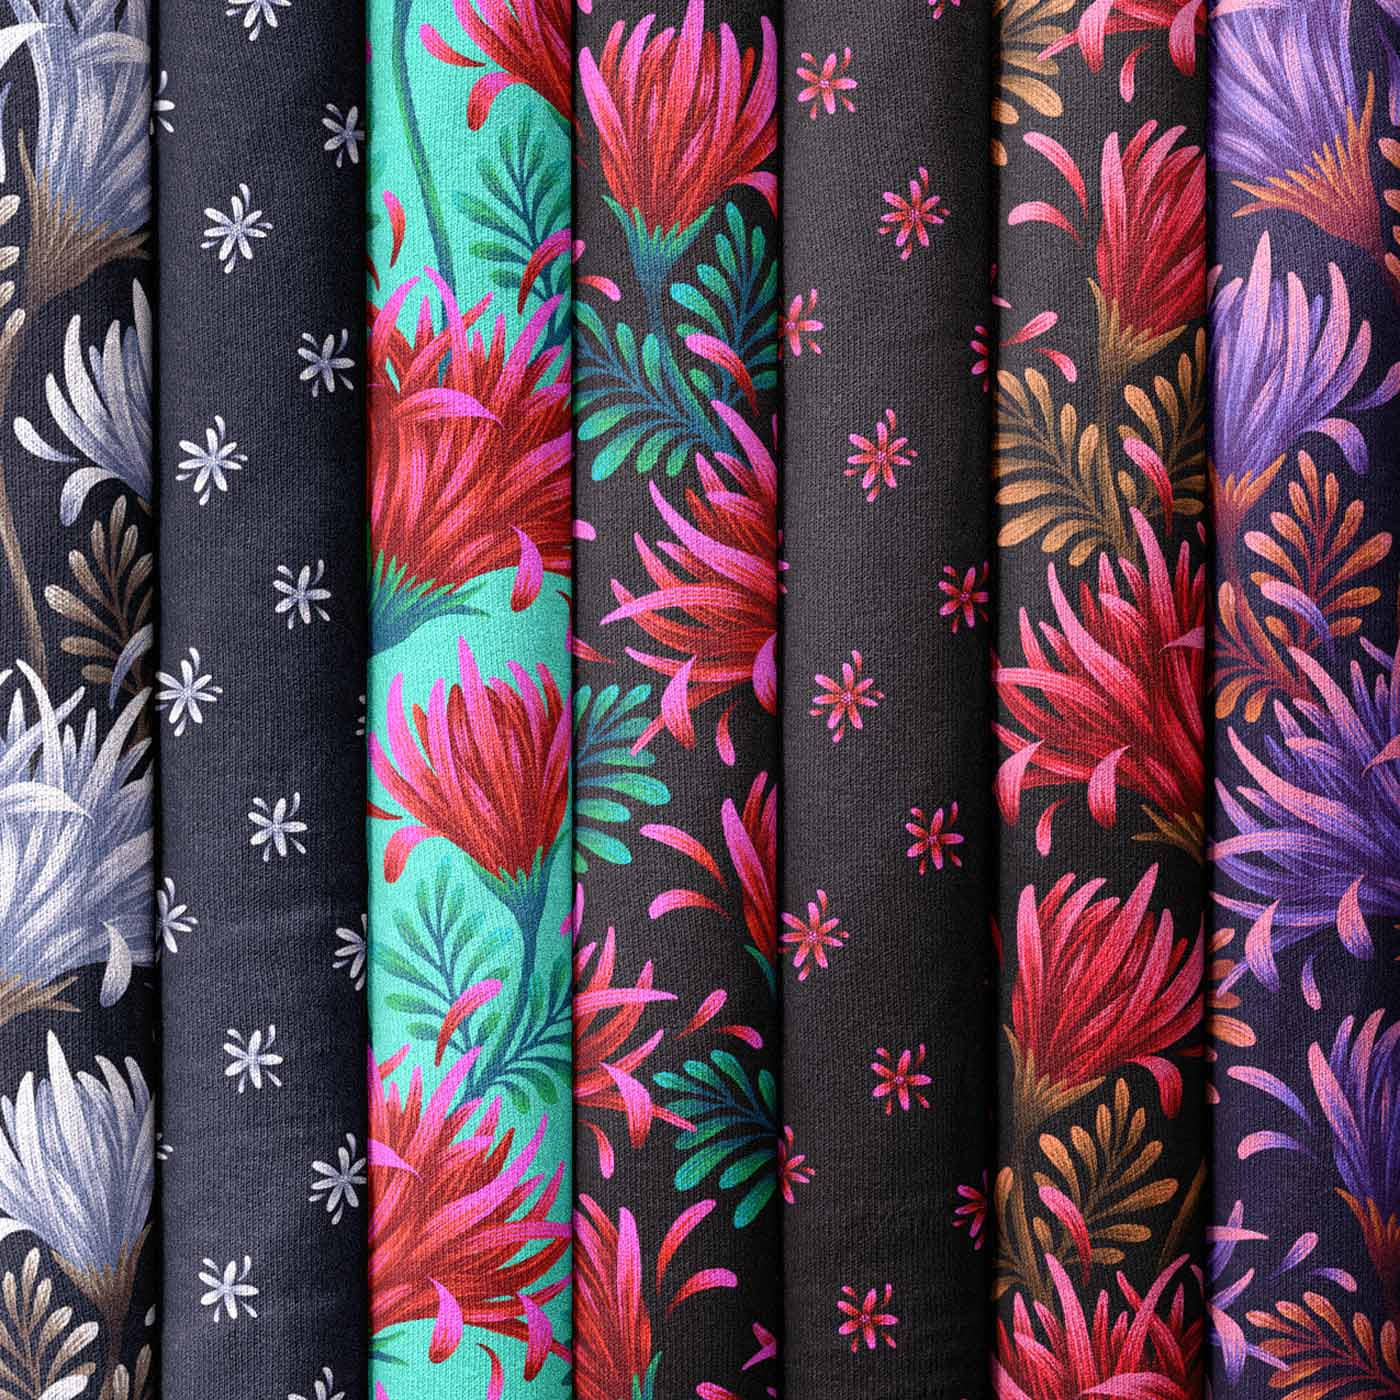 Coordinating collection of fabrics with daisy flowers by Andrea Muller